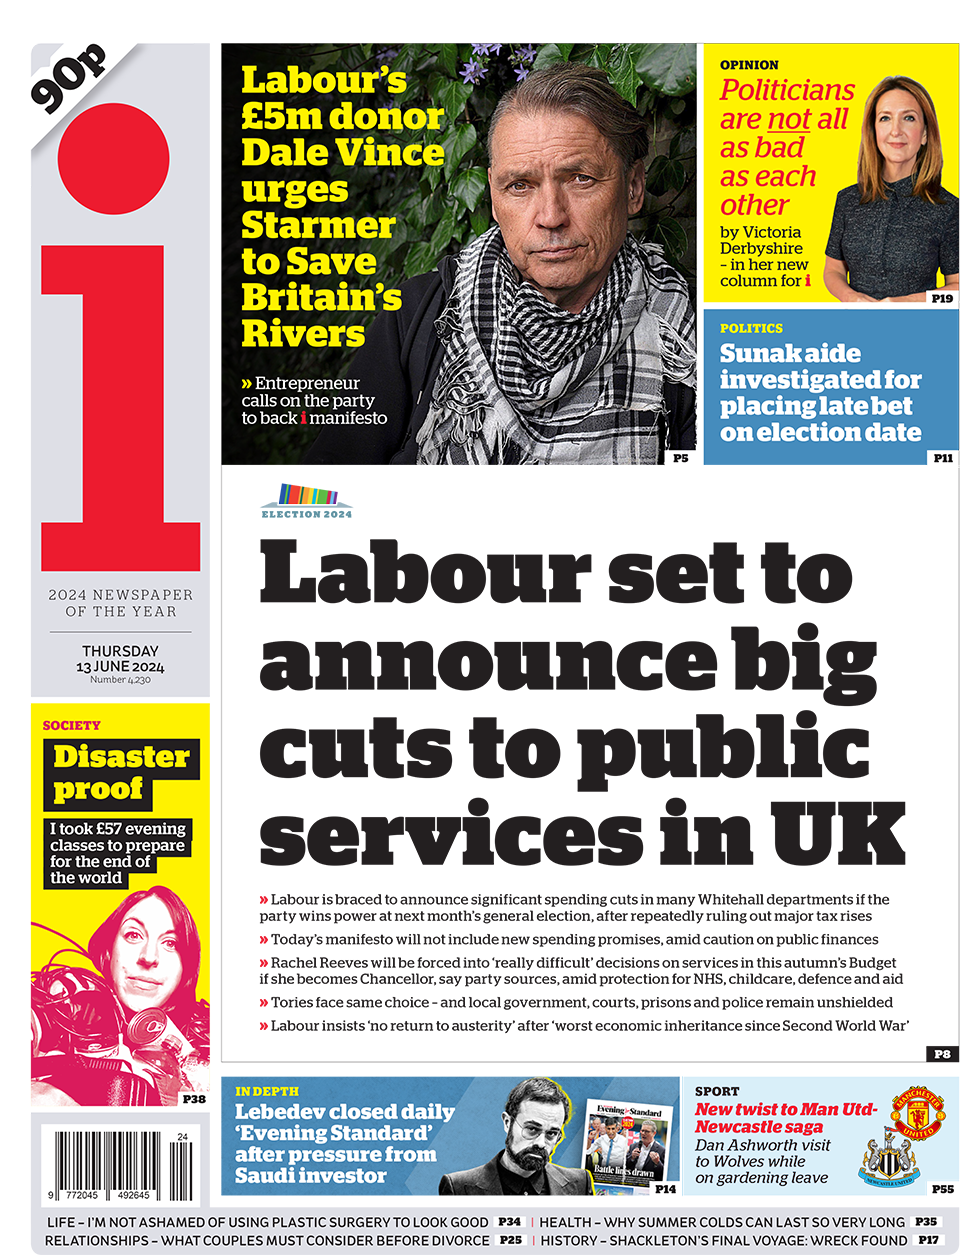 The i headline: "Labour set to announce big cuts to public services in UK"